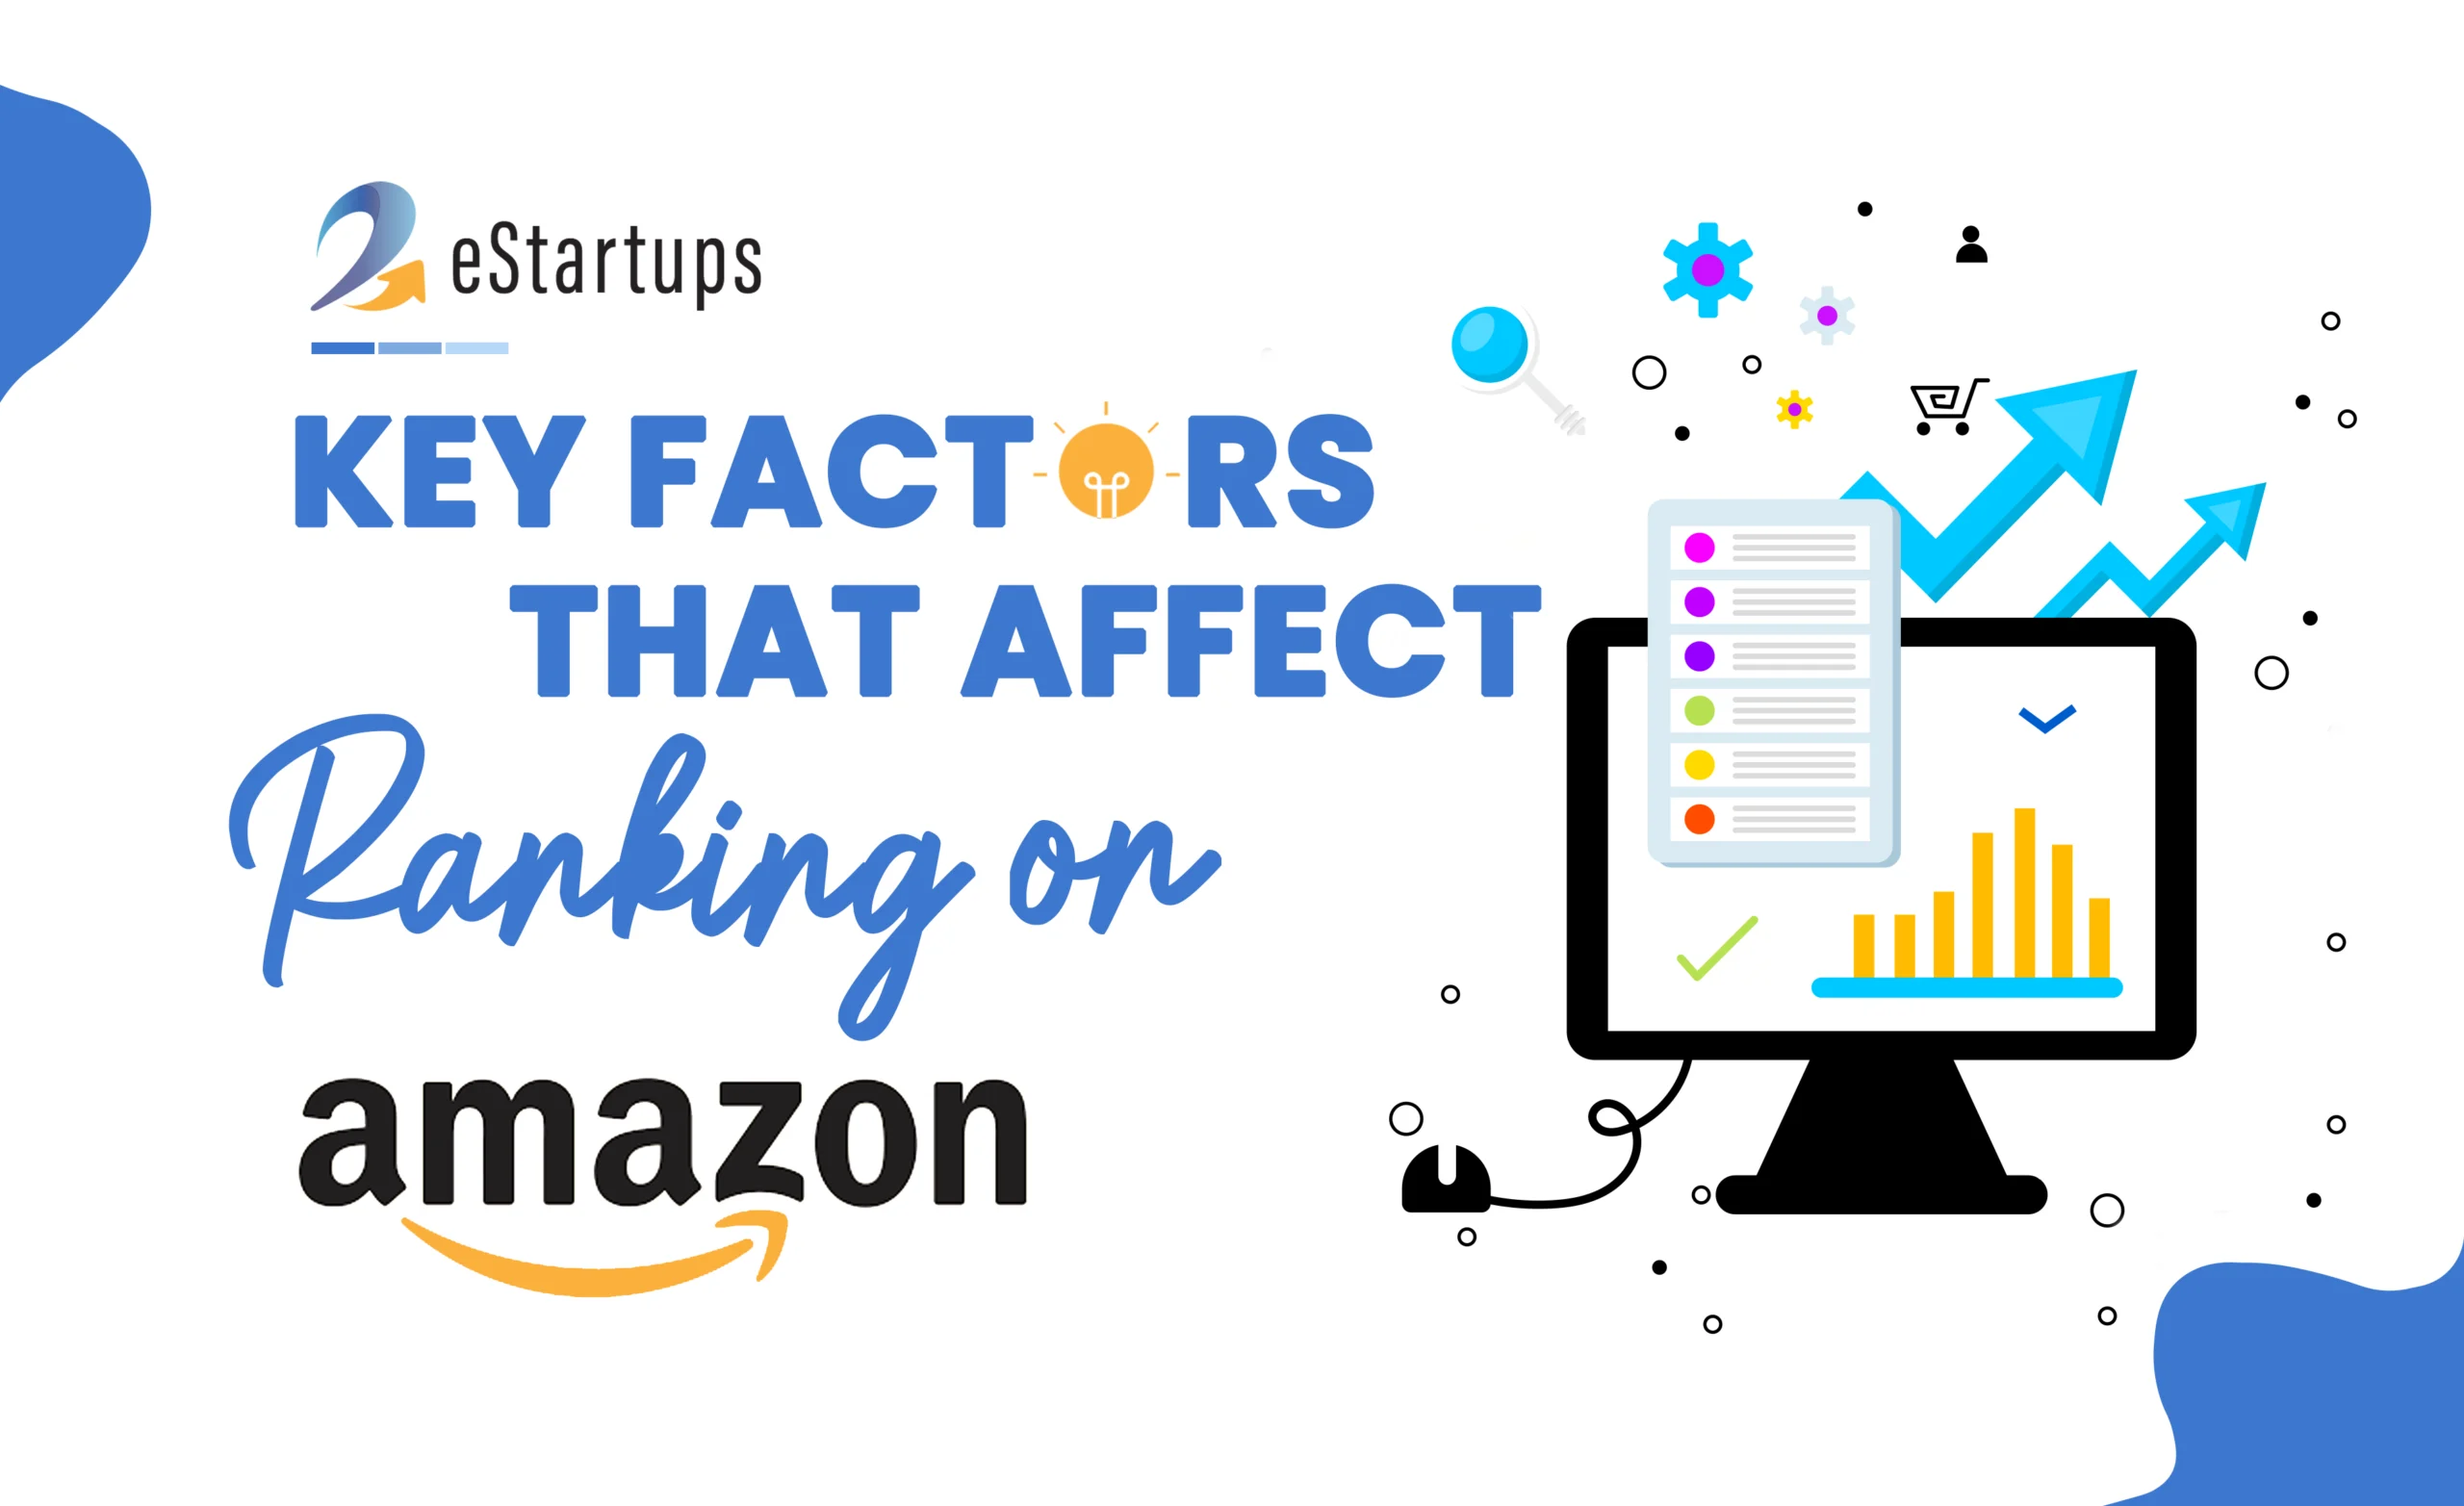 What are the key factors that affect ranking on amazon?